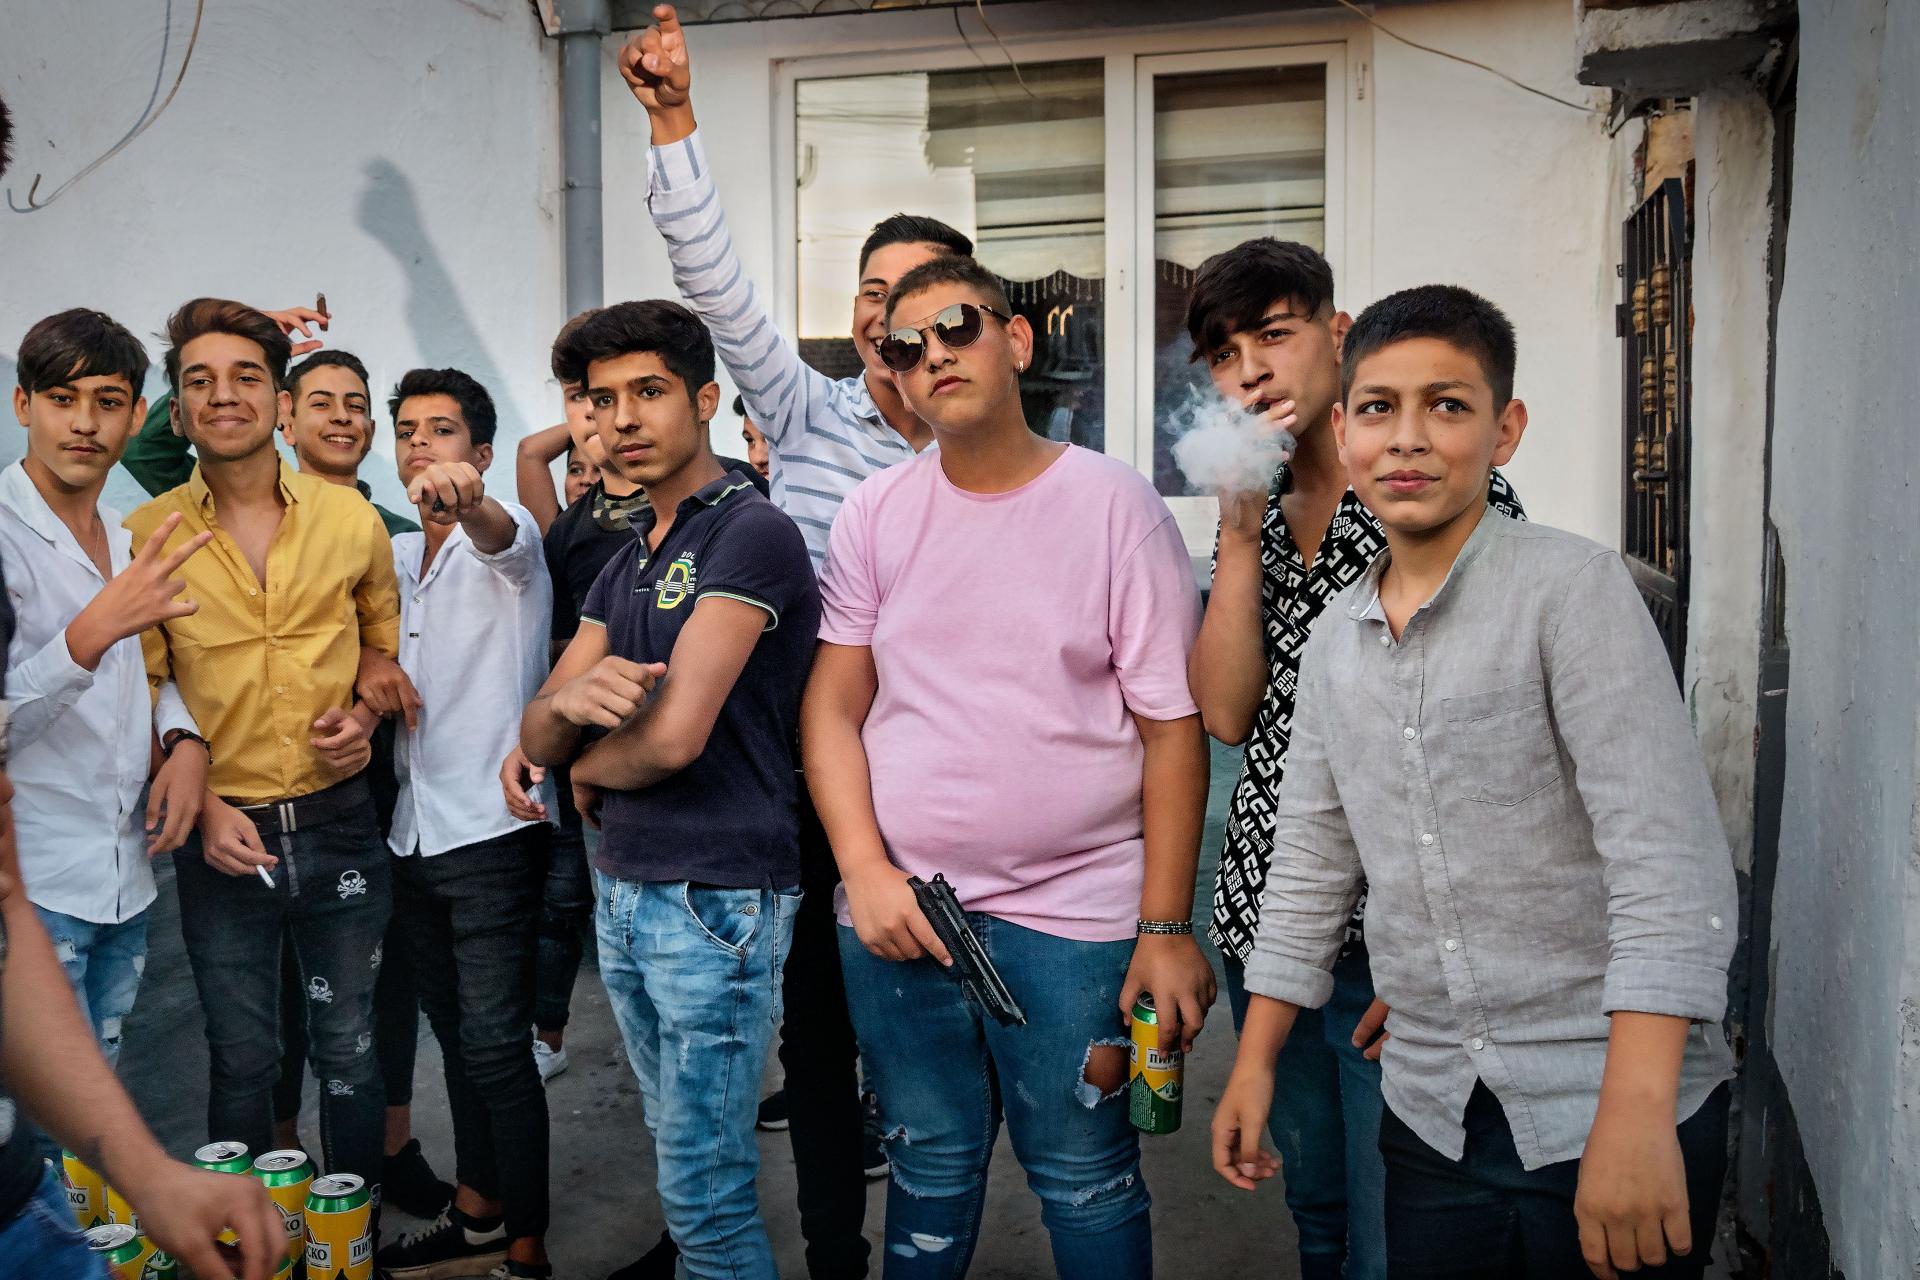 London Photography Awards Winner - ZOR - At Europe's Biggest Gypsy Ghetto